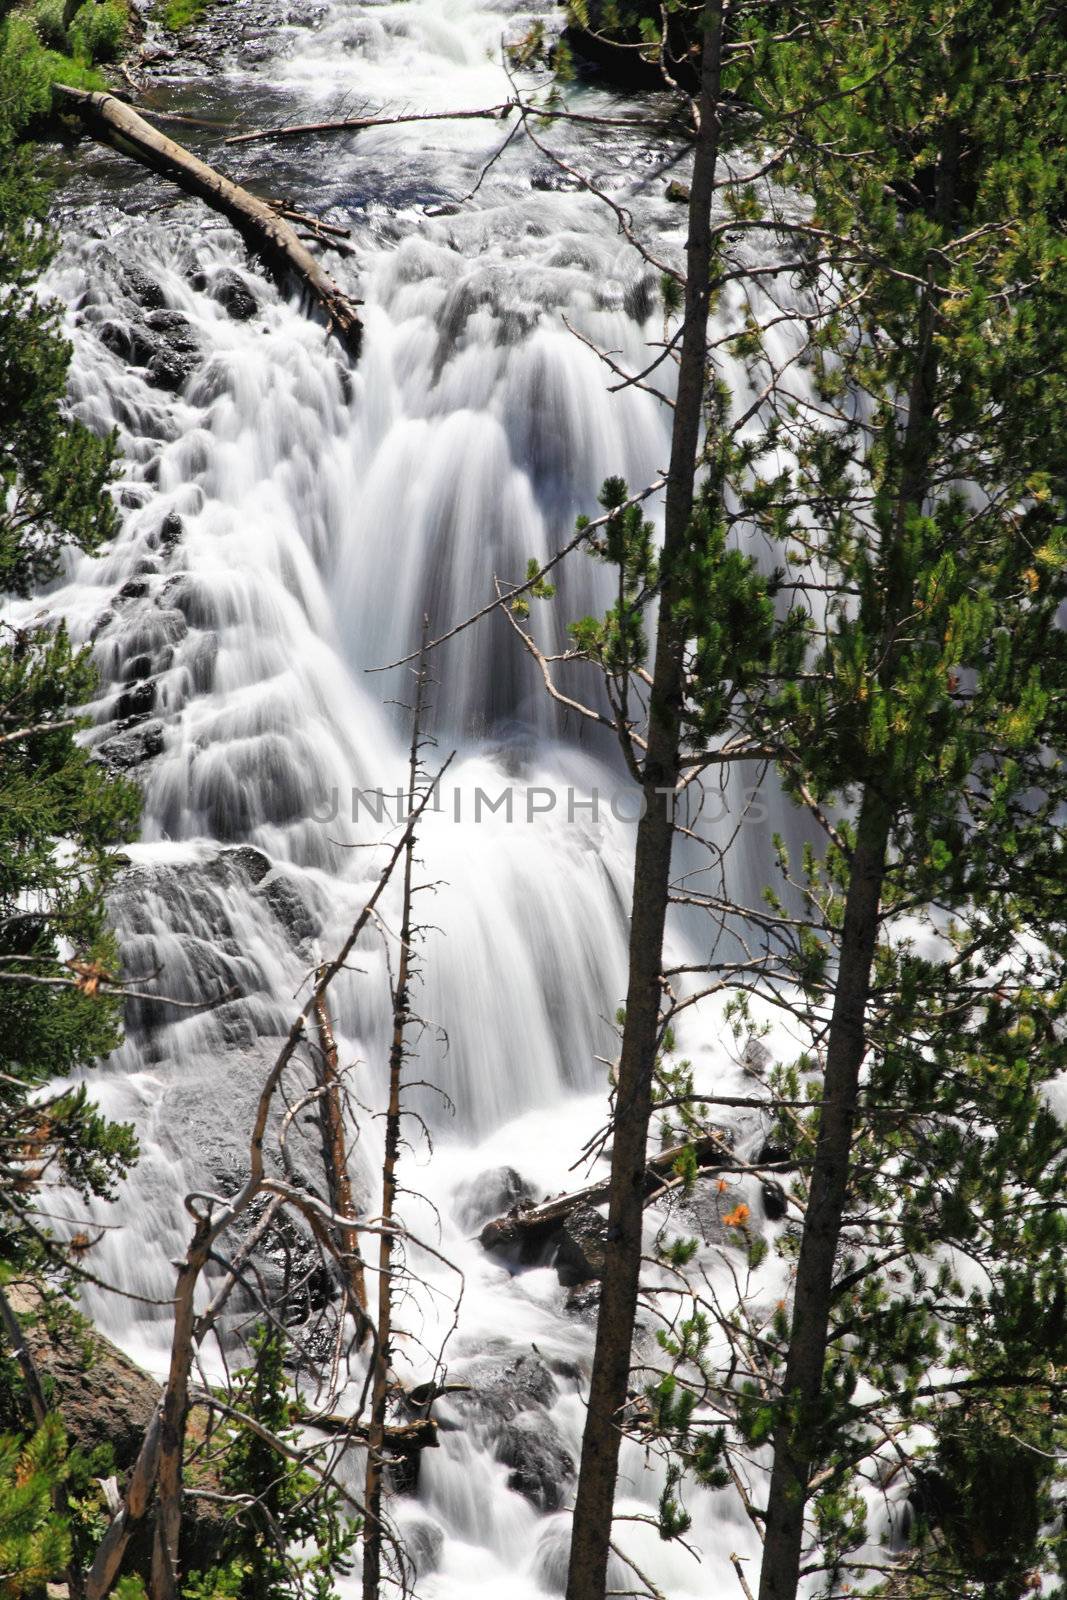 The Kepler Cascades in the Yellowstone National Park